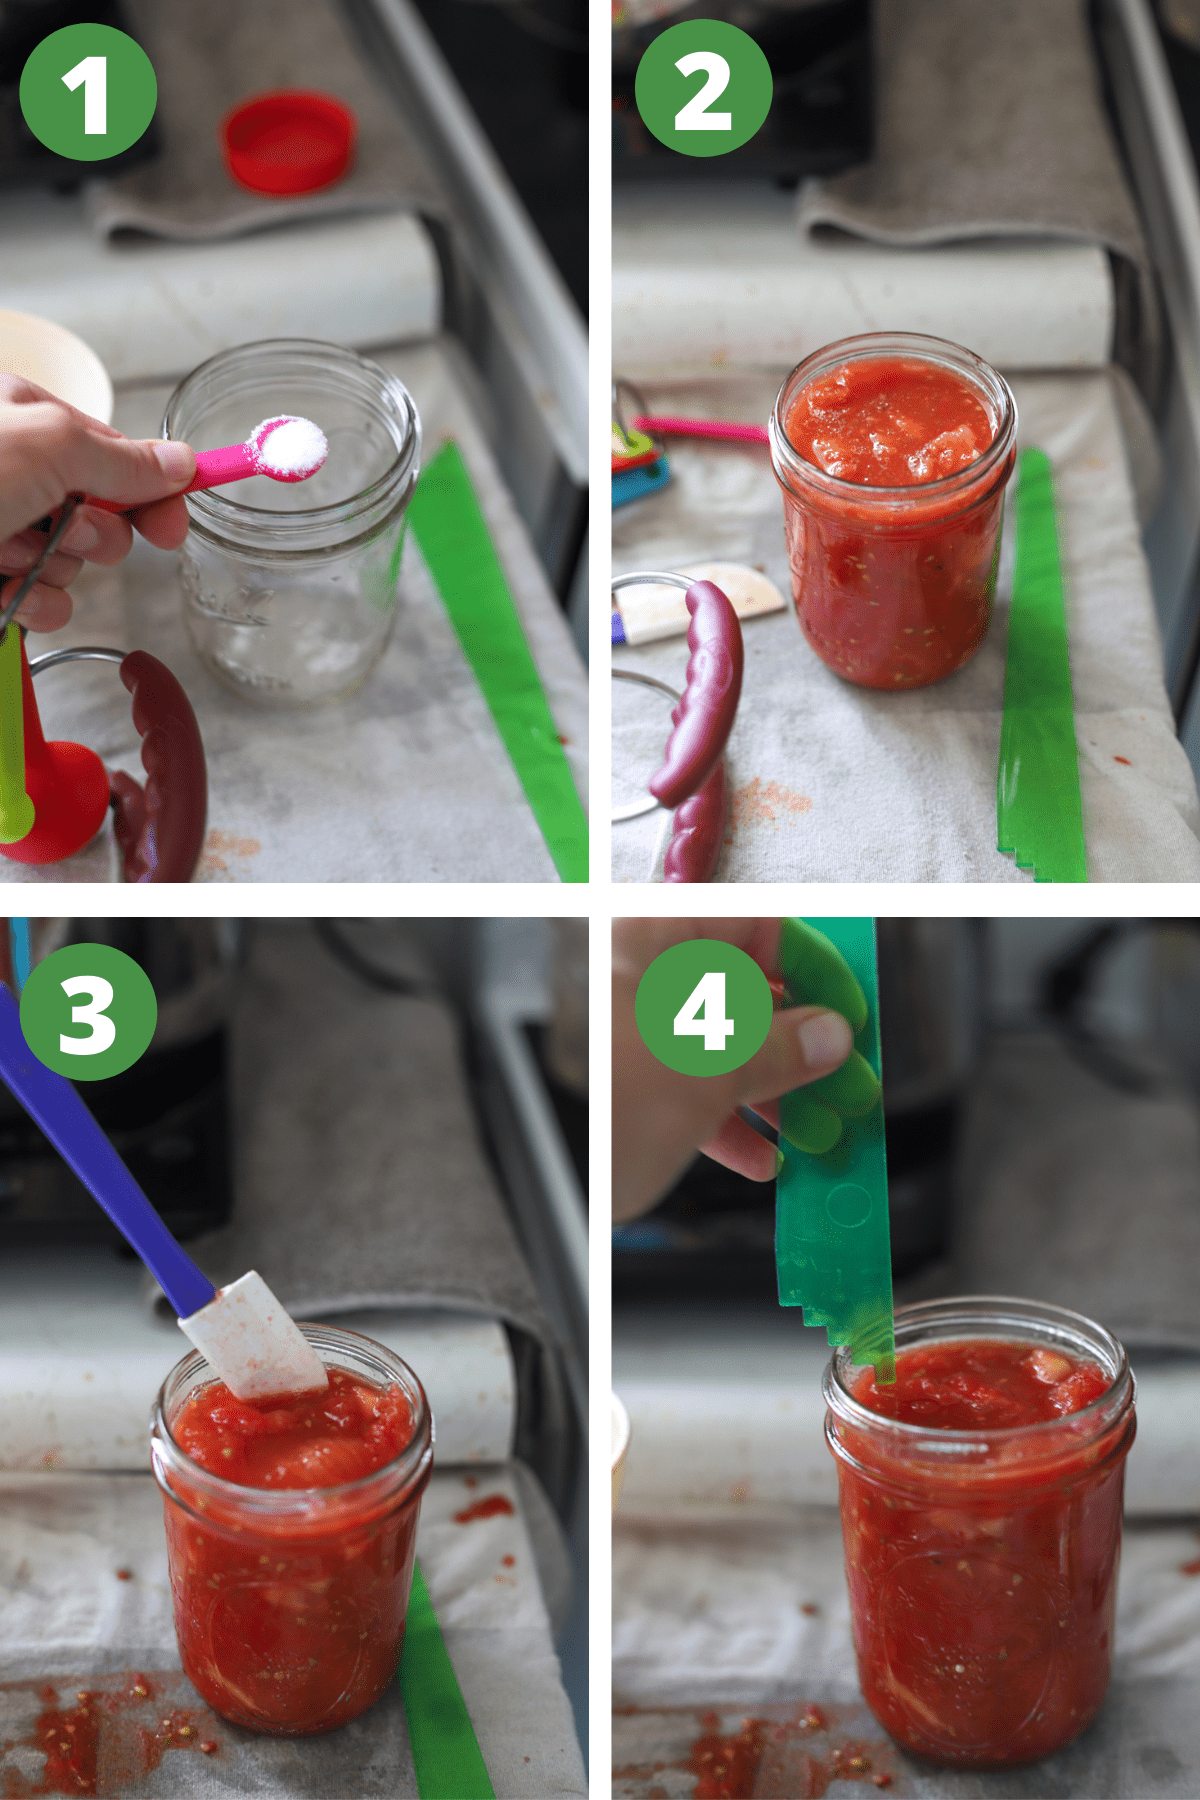 Collage with images showing how to fill a jar of diced tomatoes for canning